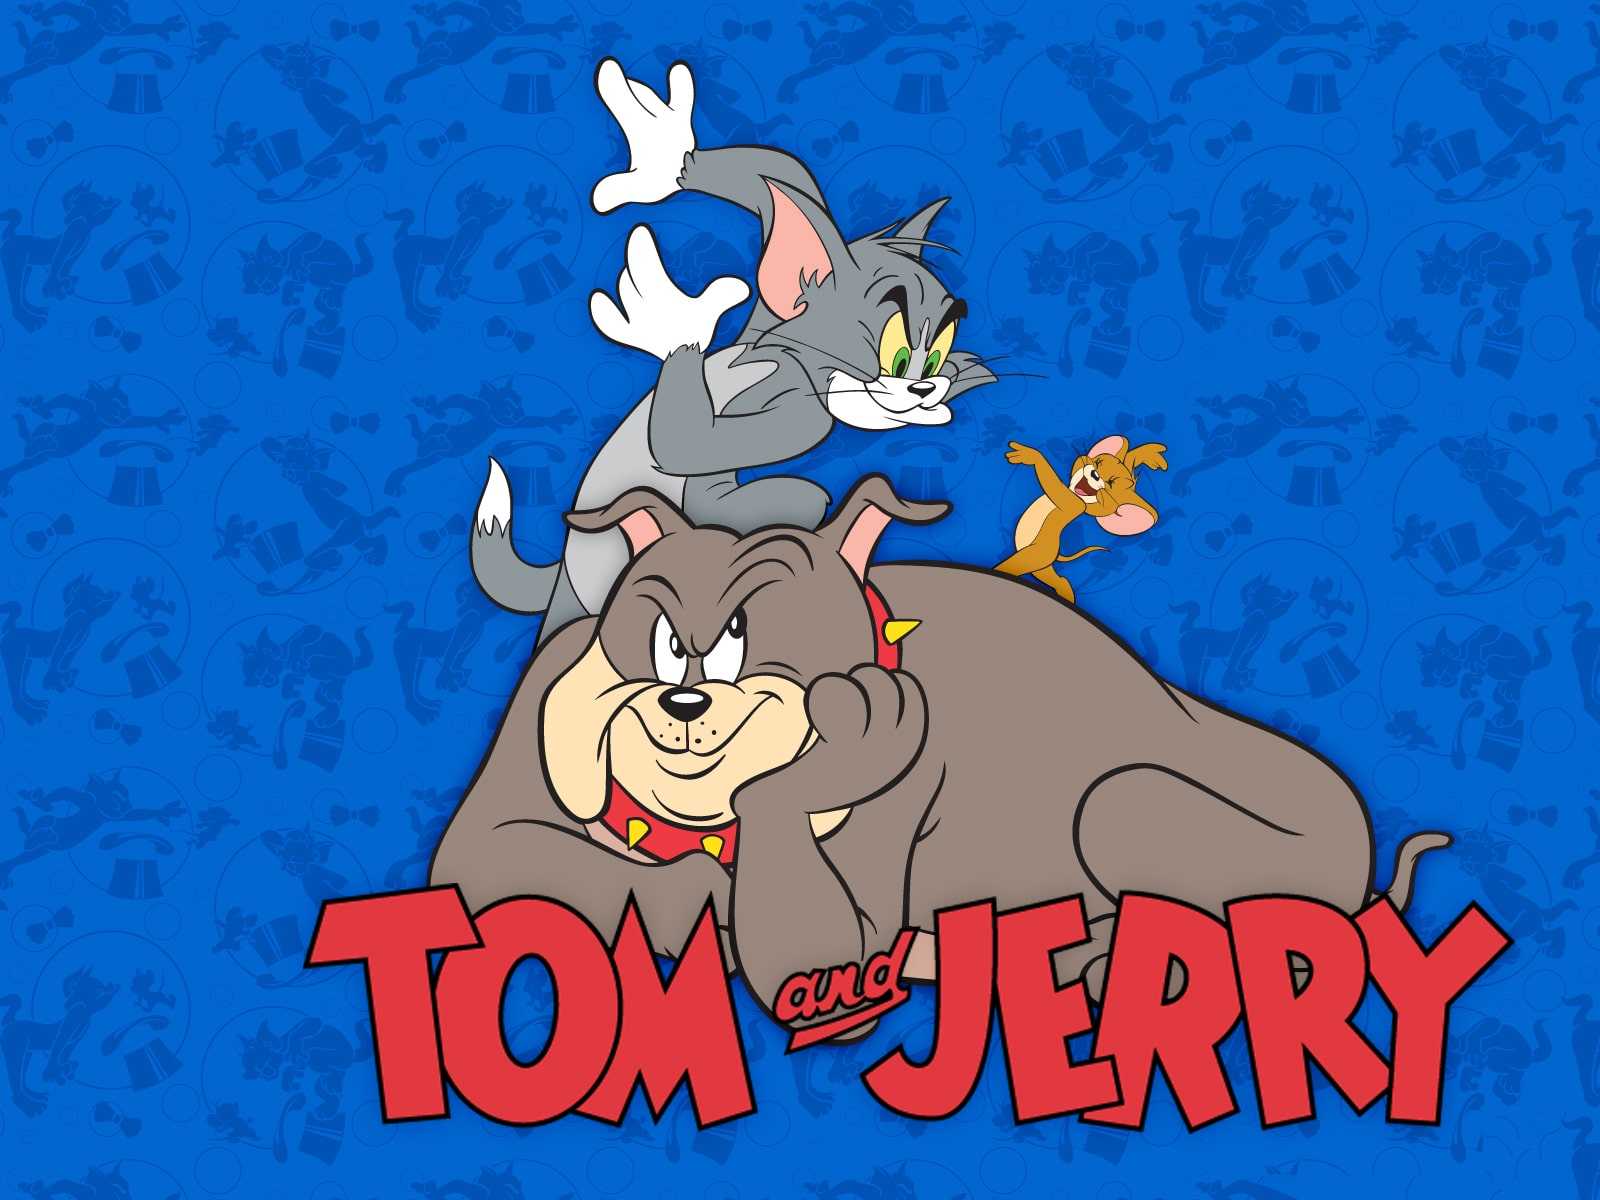 Wallpaper Tom And Jerry Wallpapers